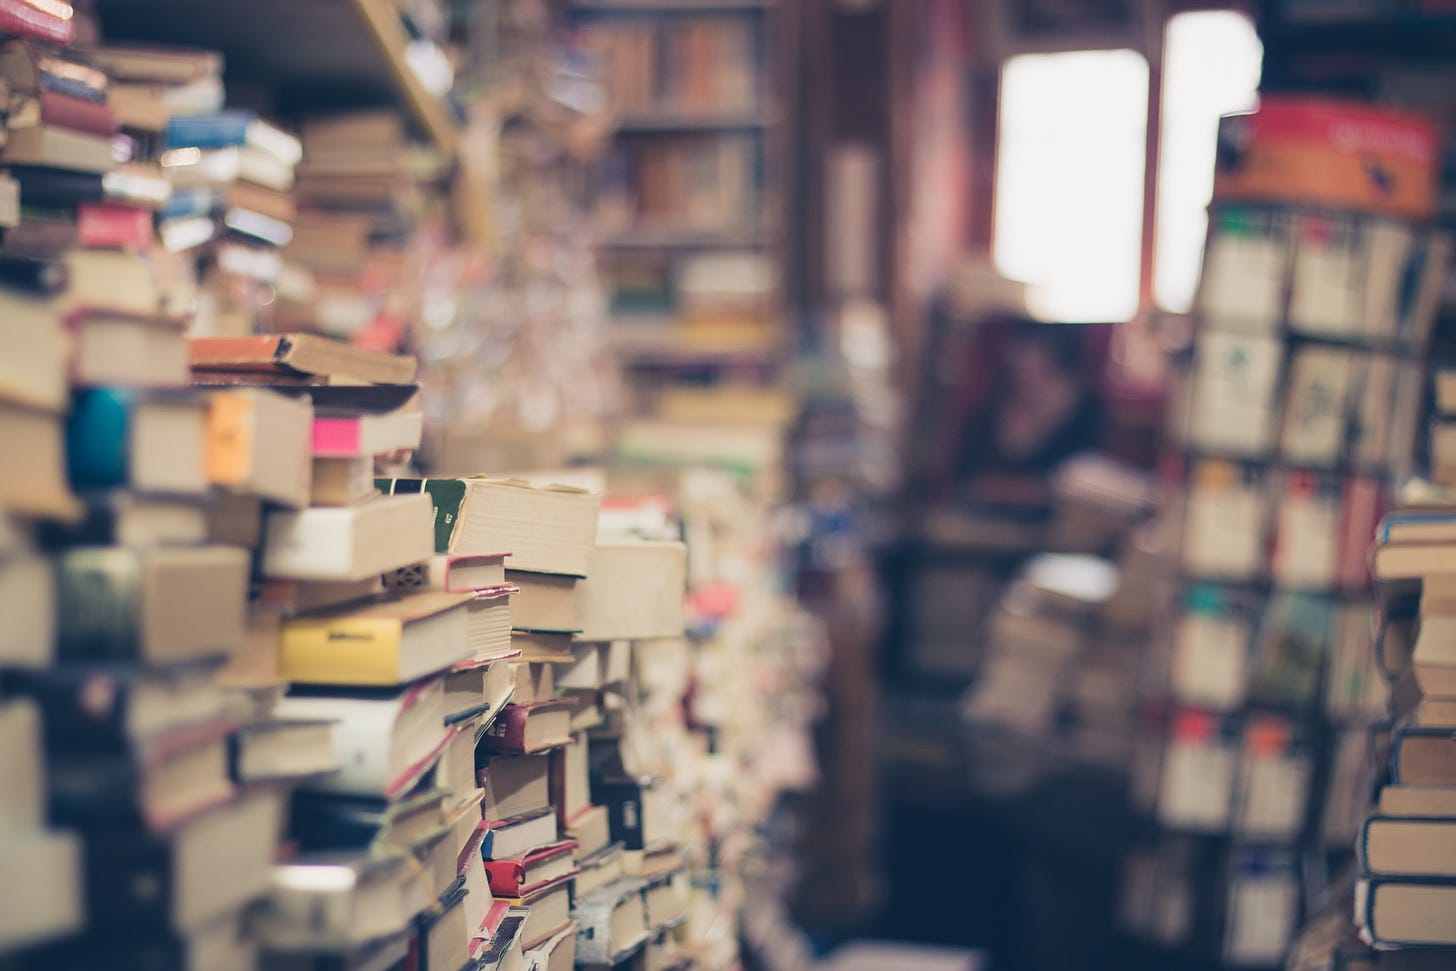 Photo of old books stacked at a bookstore by Eli Francis on Unsplash.